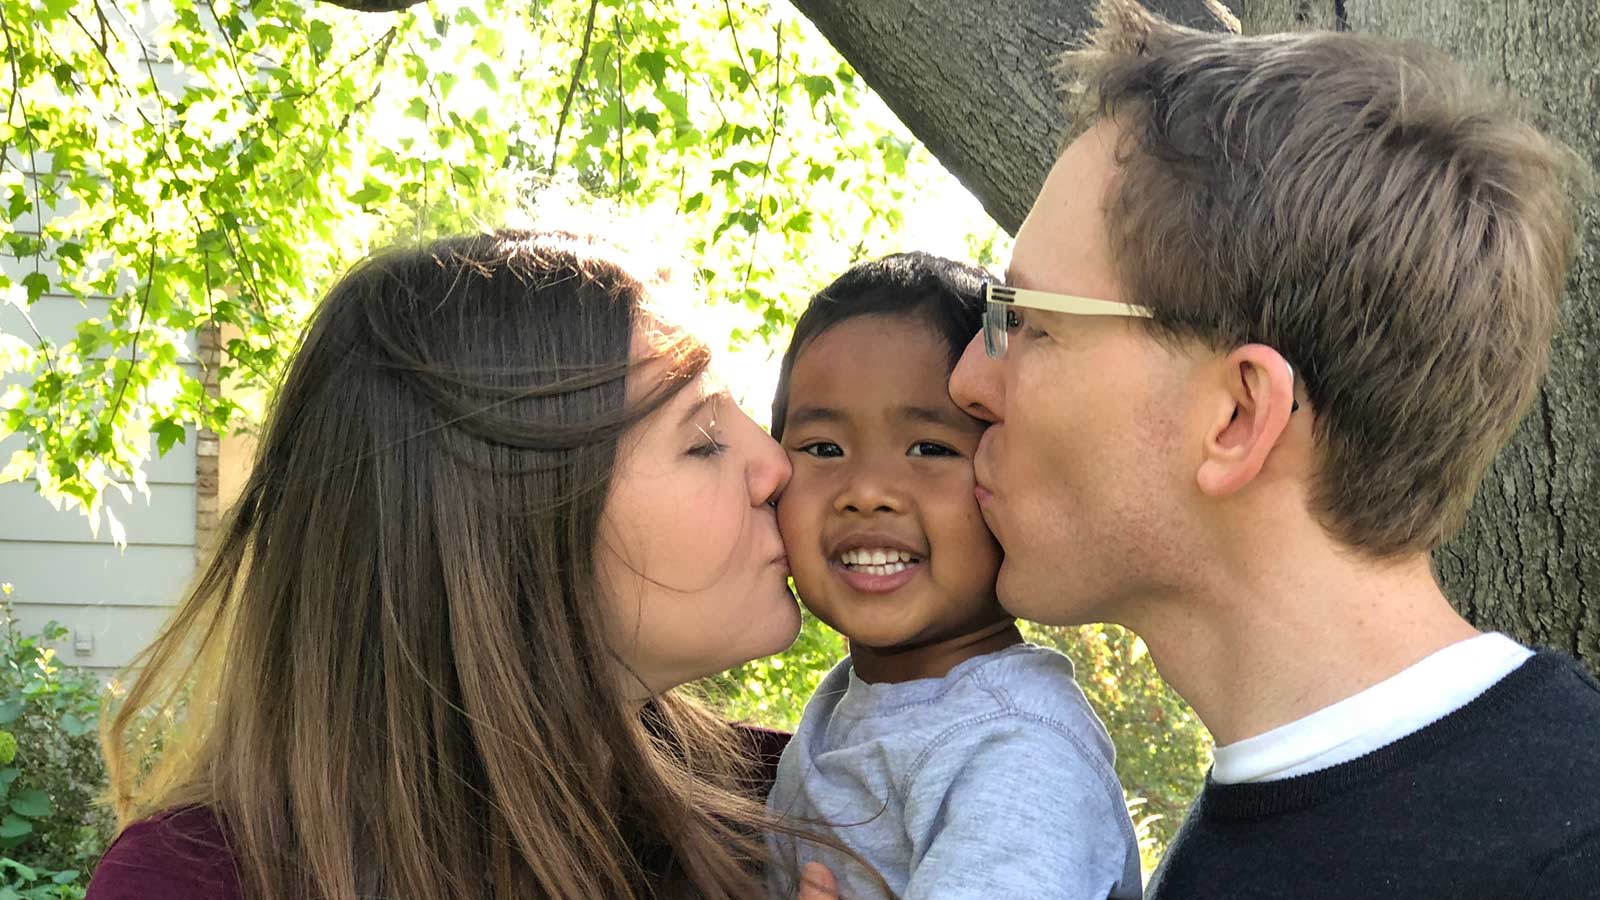 adoptive parents giving son adopted from Thailand a kiss on the cheek